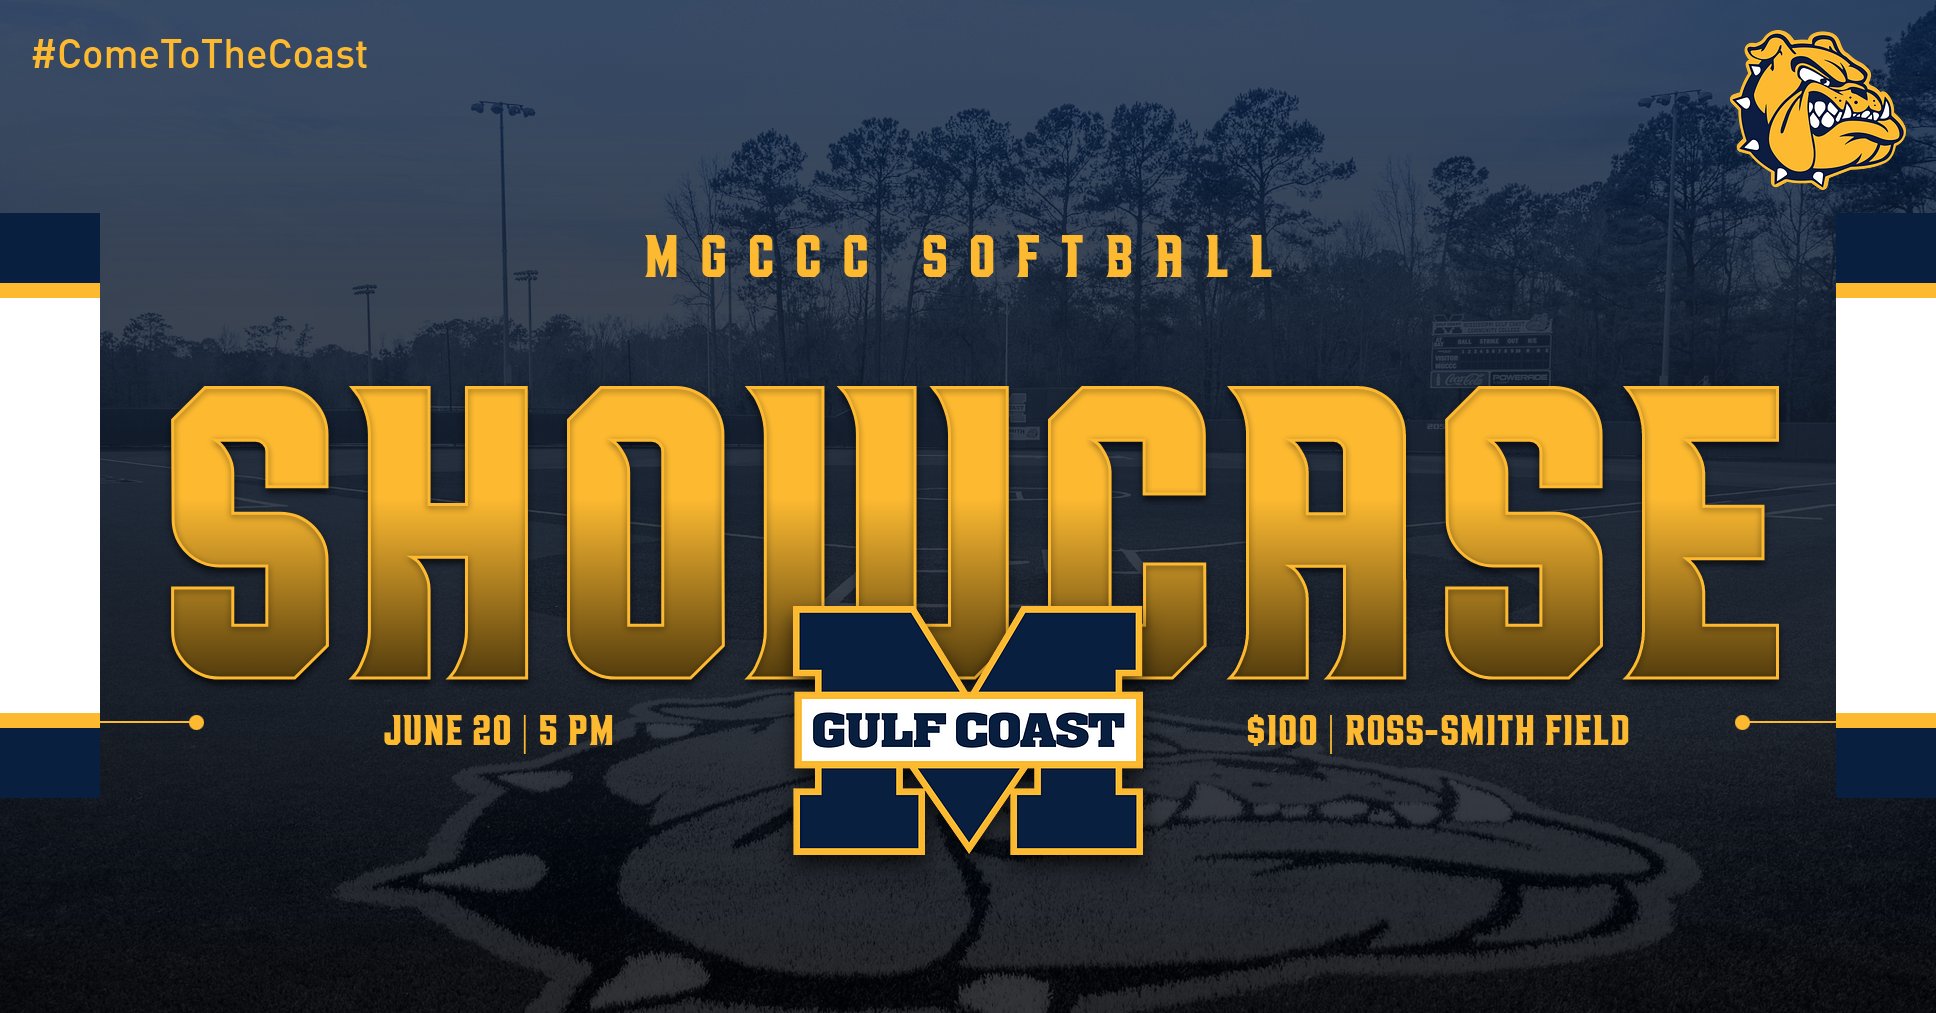 Register now for MGCCC Softball Prospect Camp